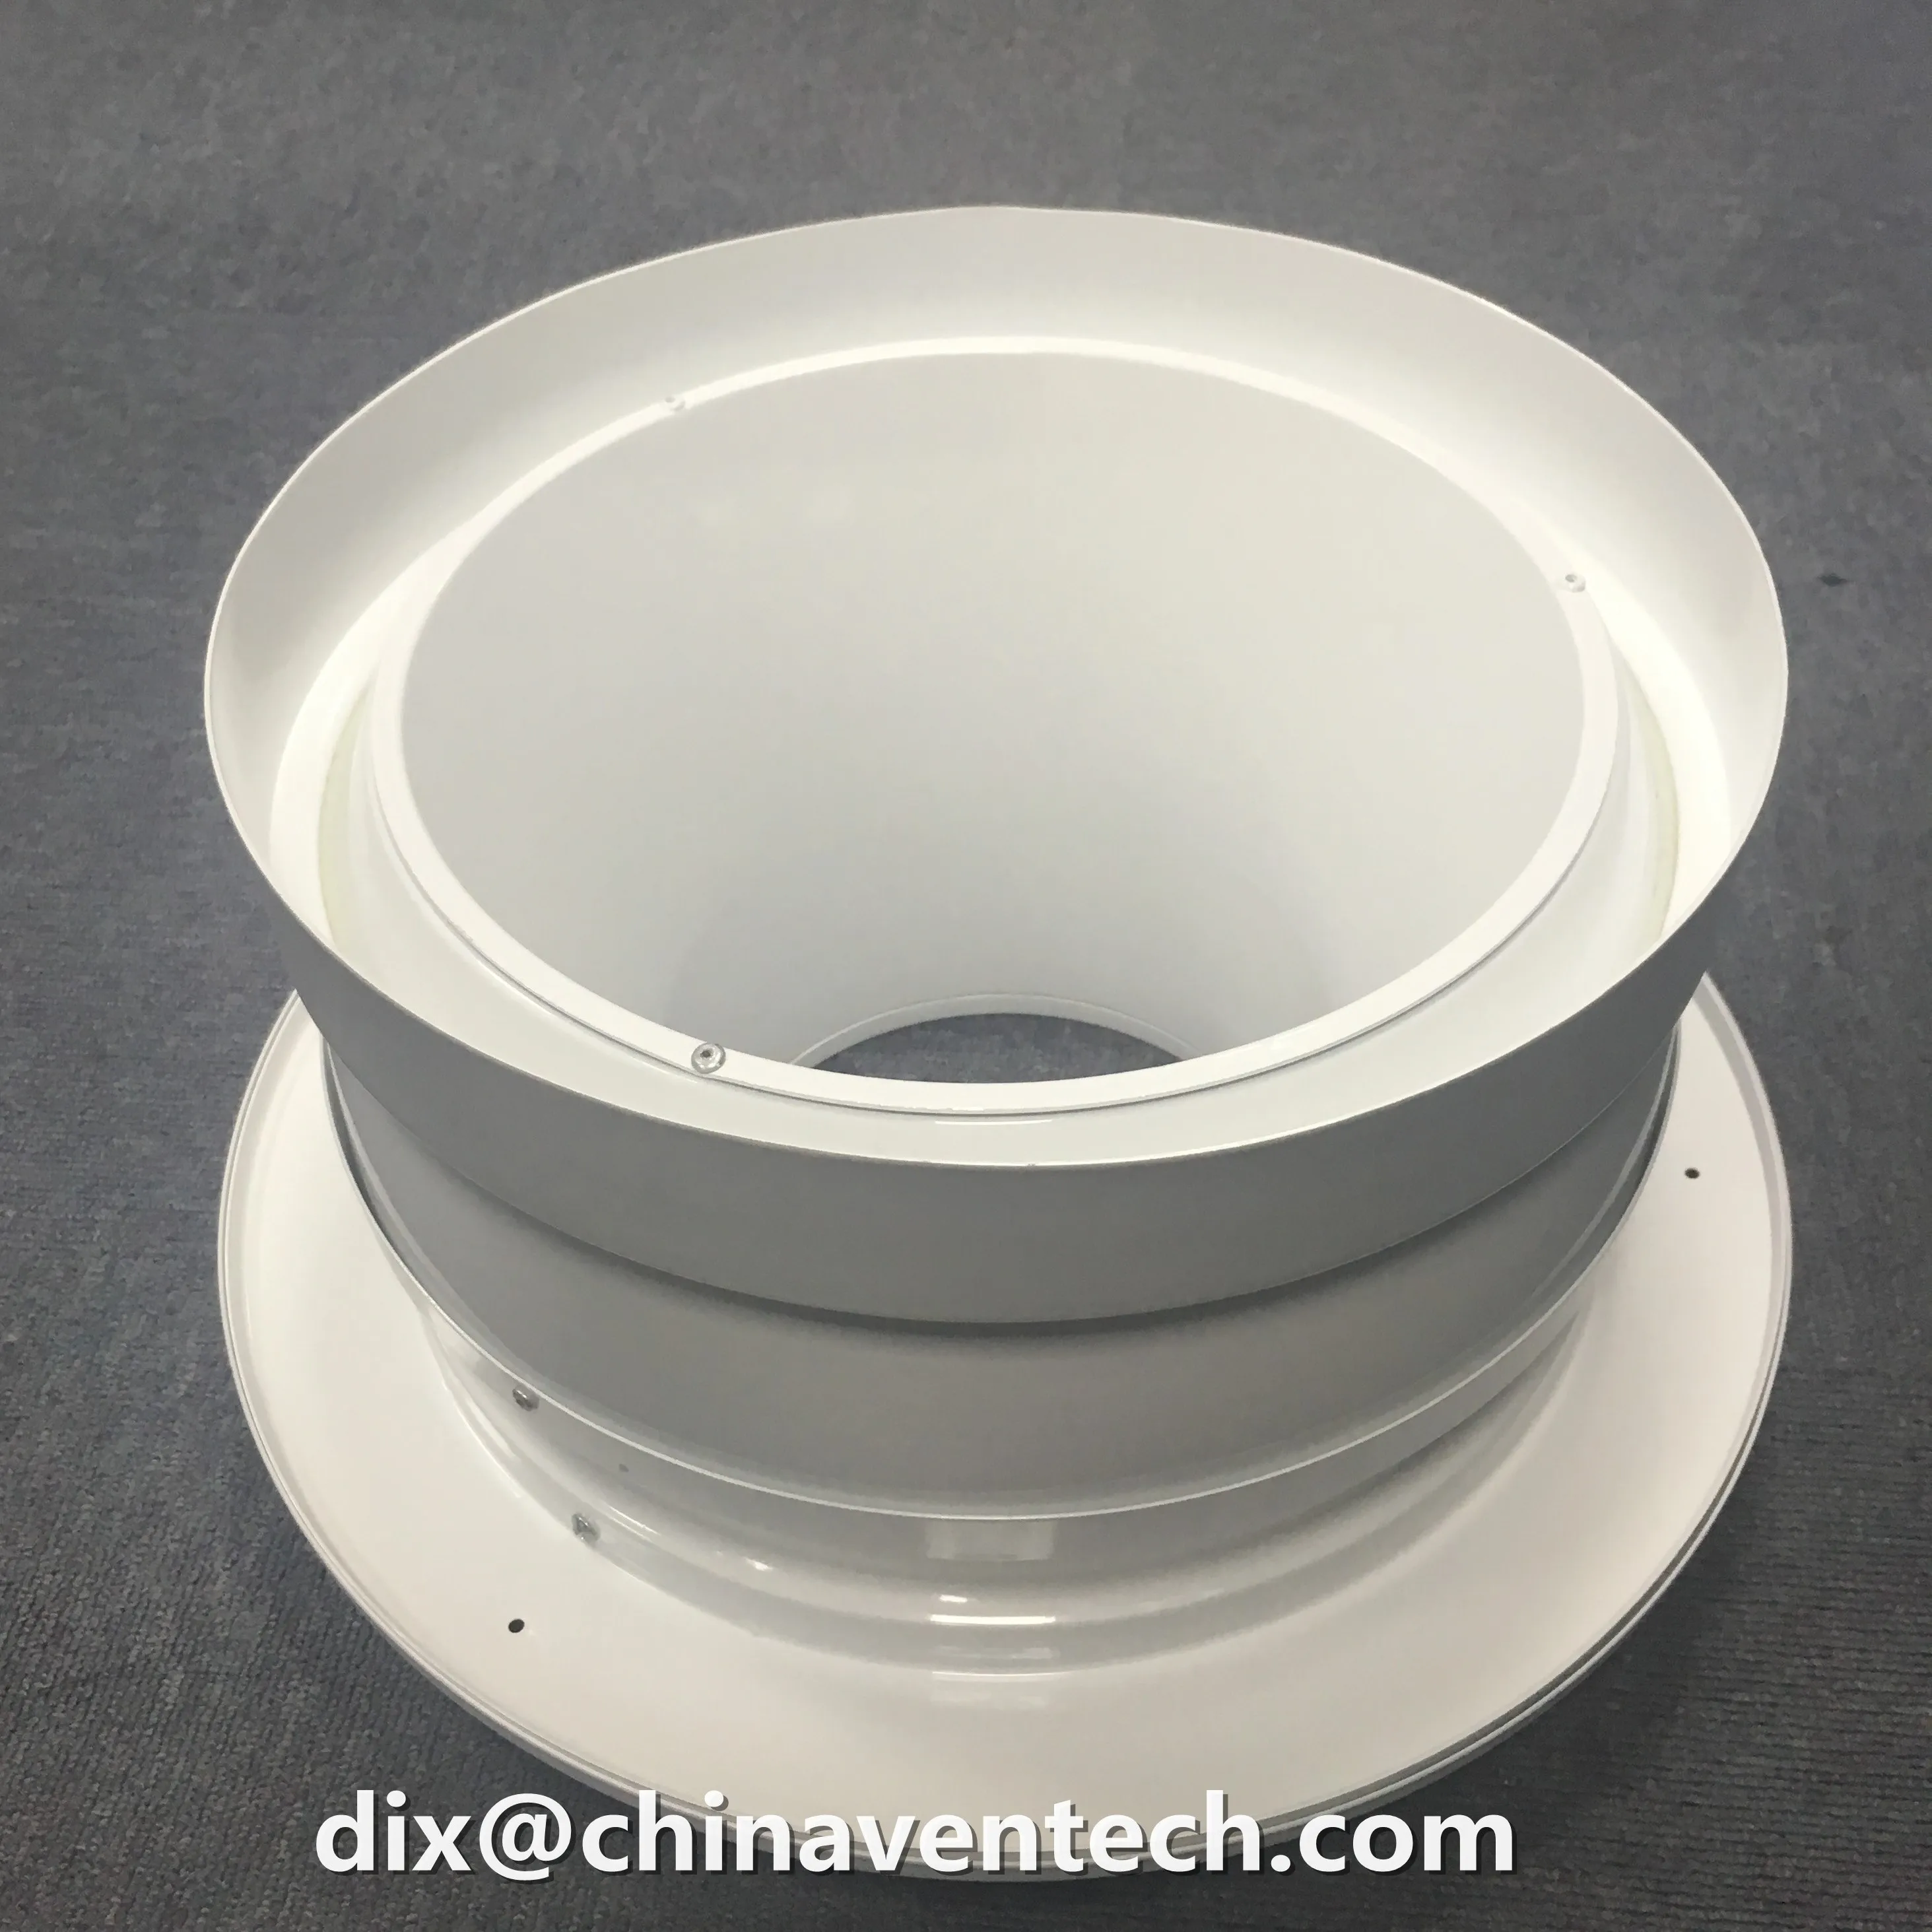 Free Sample Hvac air supply round duct ceiling eye ball type jet diffuser